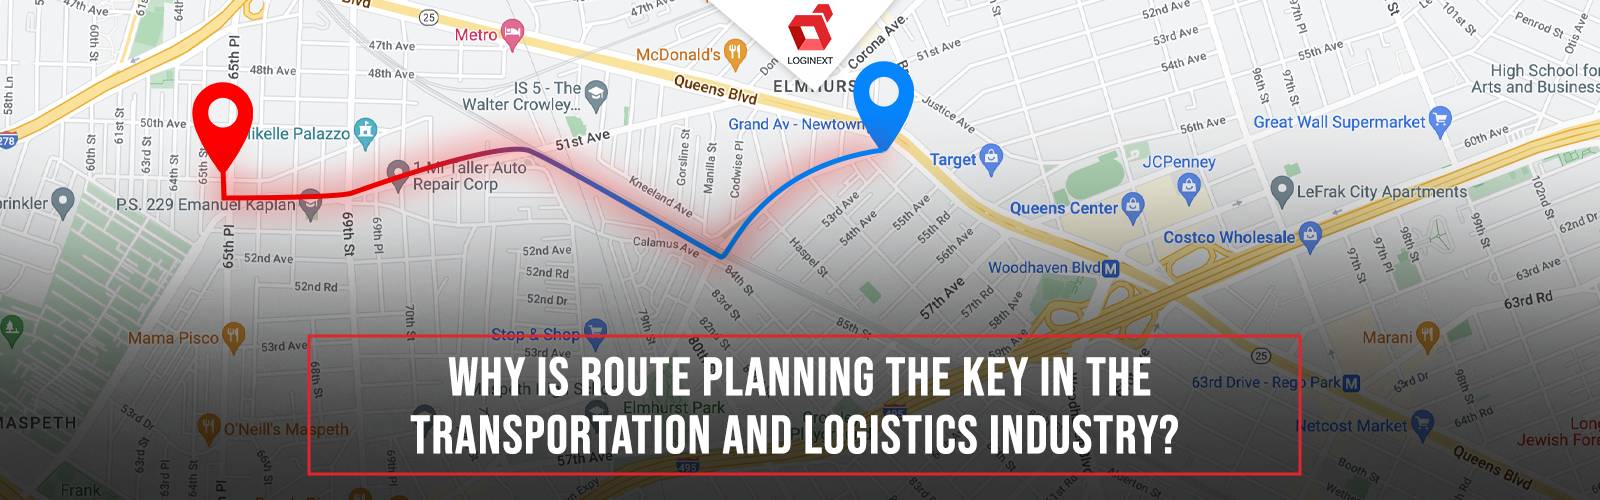 Importance of route planning in transportation and logistics